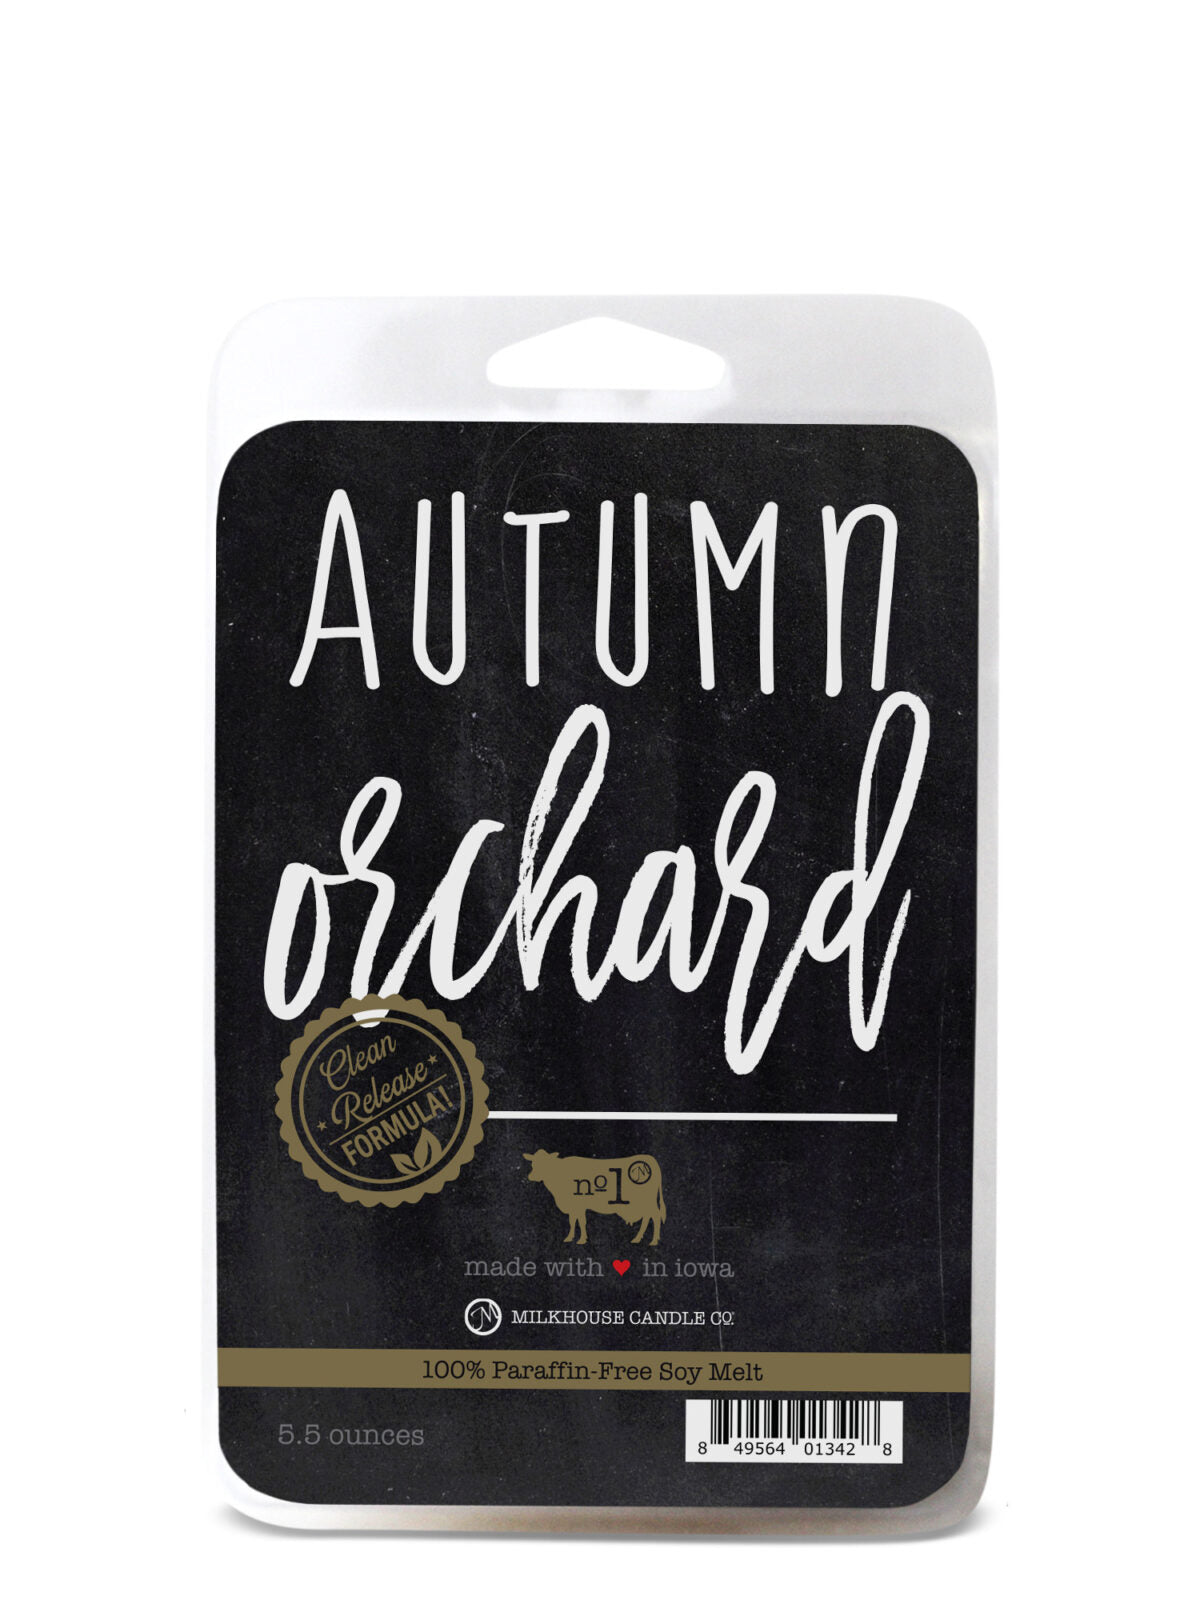 Autumn Orchard 5.5oz Fragrance Melt by Milkhouse Candle Co.